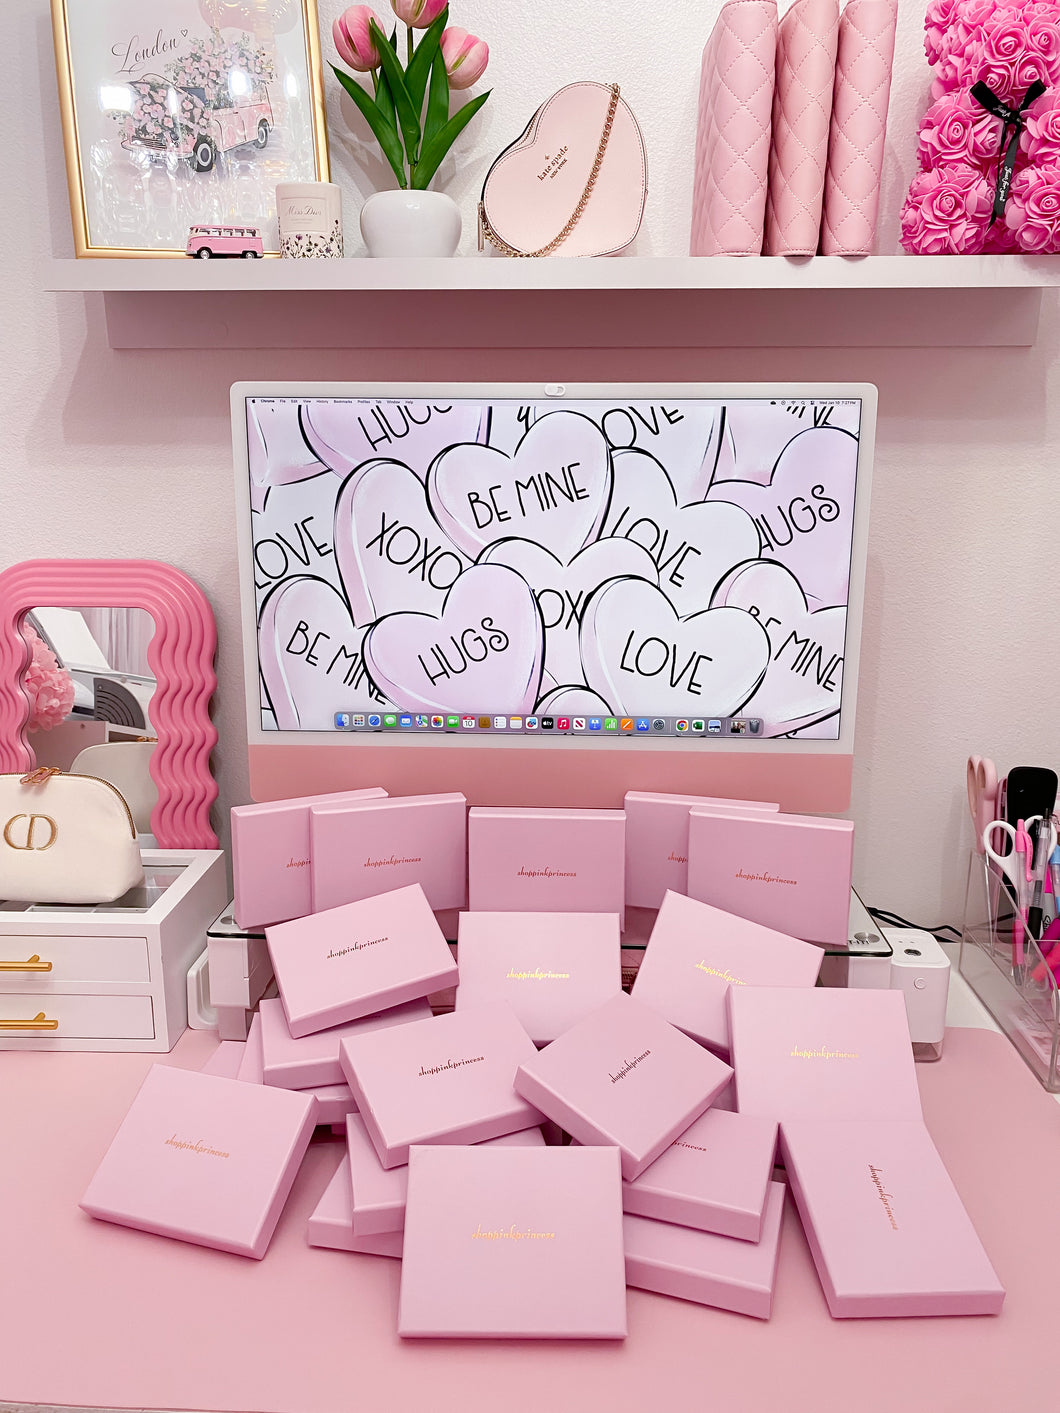 The Pink Princess Shop - All pink bedroomdreamy! 😍💕 #pink